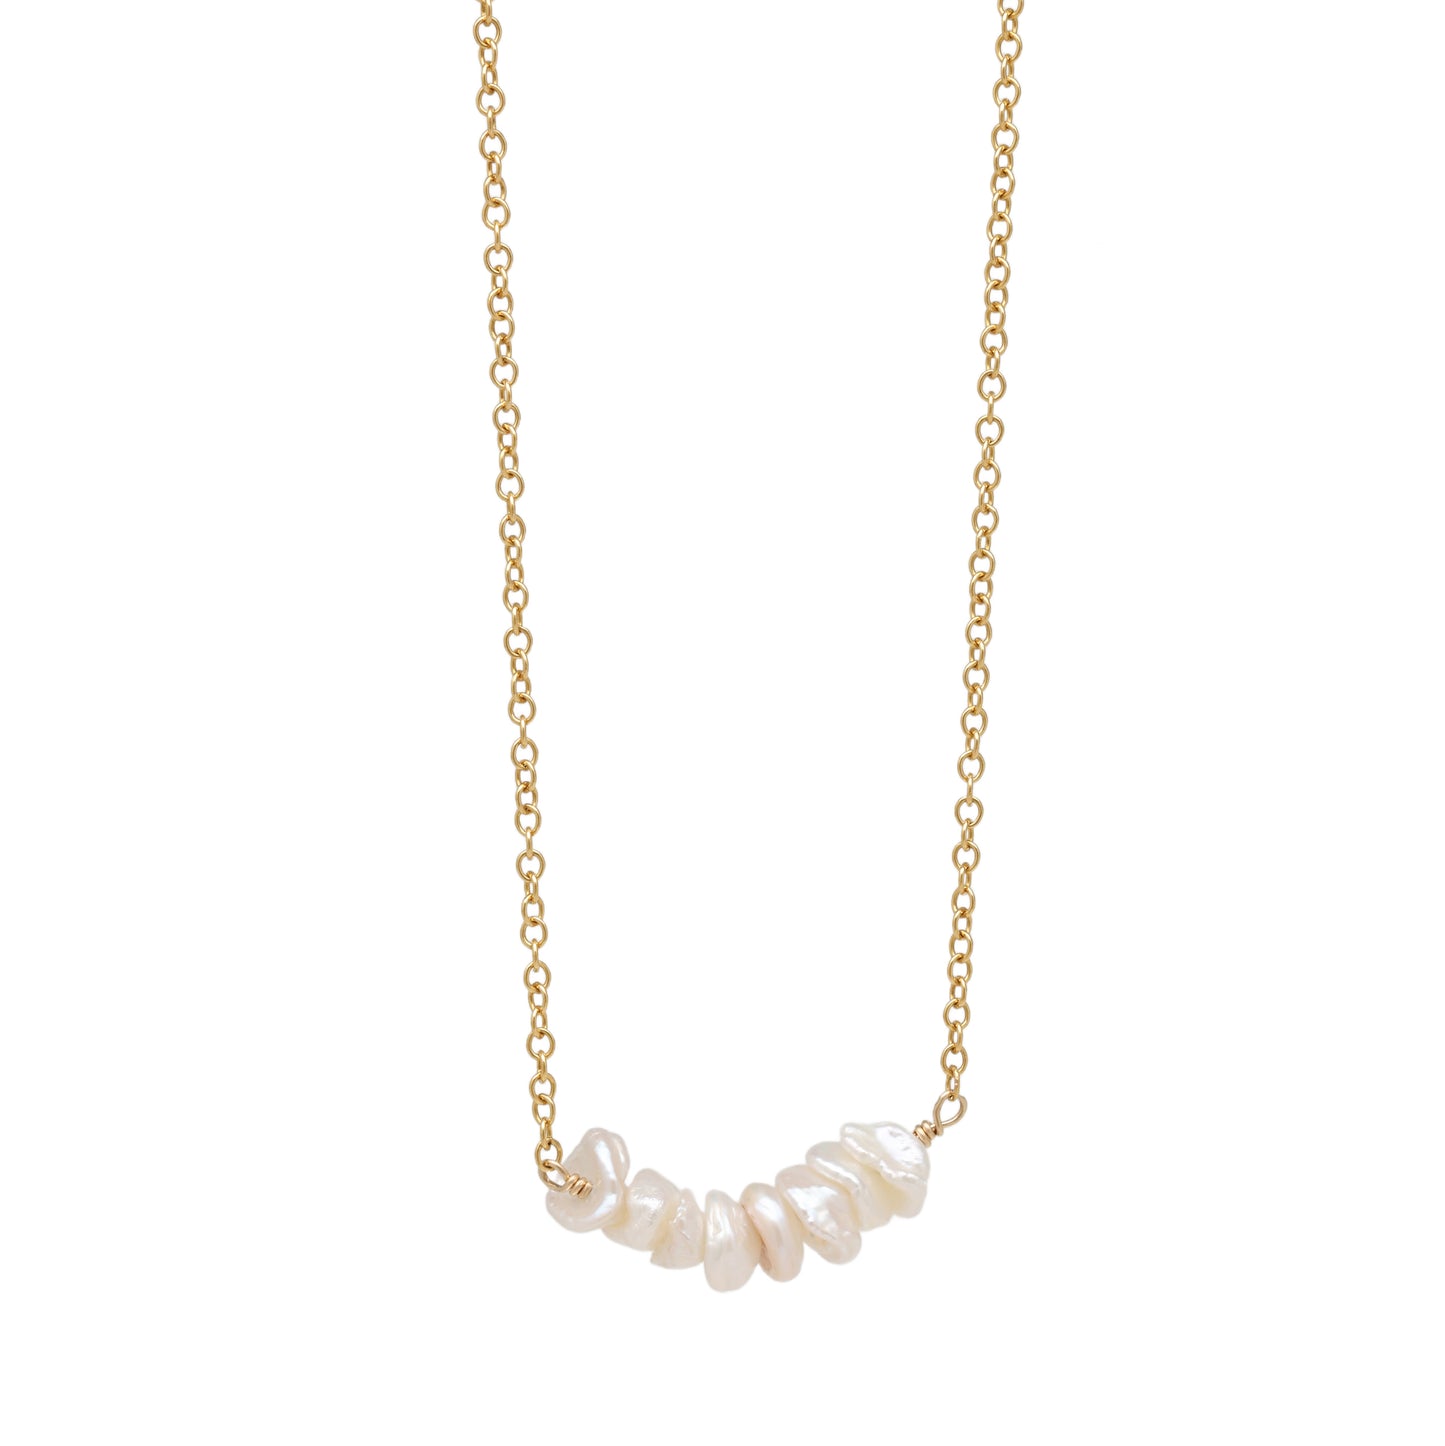 White Keishi Pearl Necklace